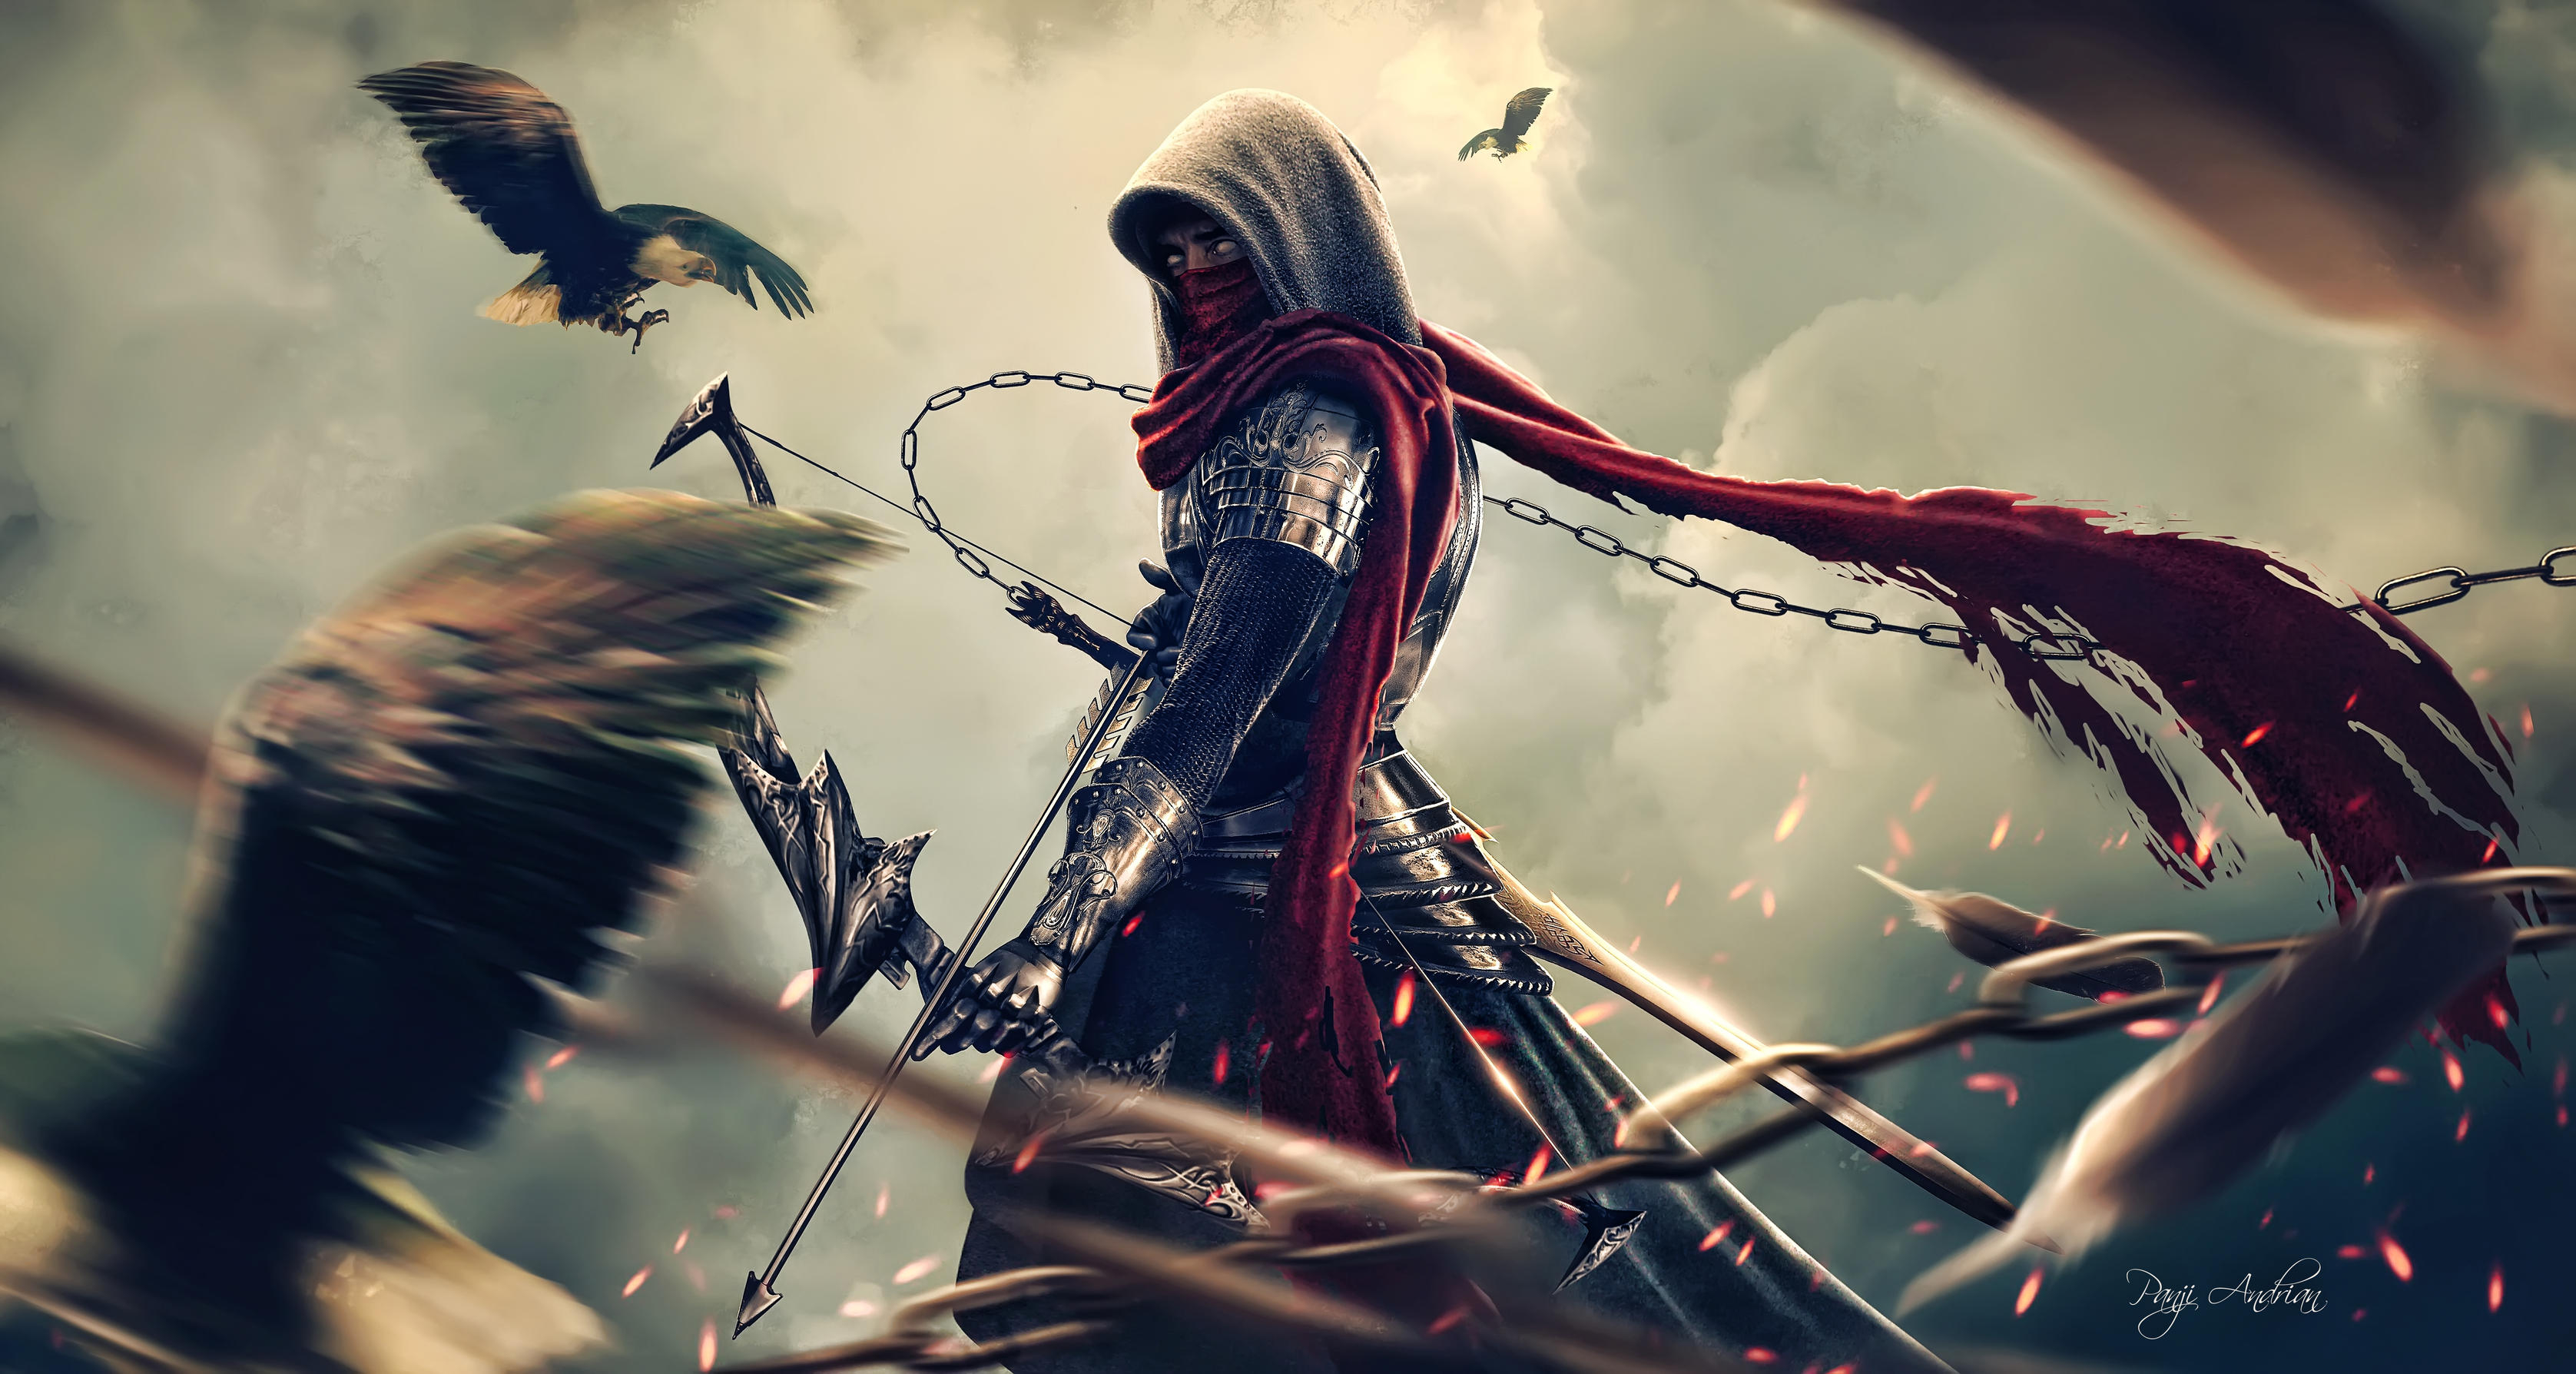 The eagle archer k hd artist k wallpapers images backgrounds photos and pictures